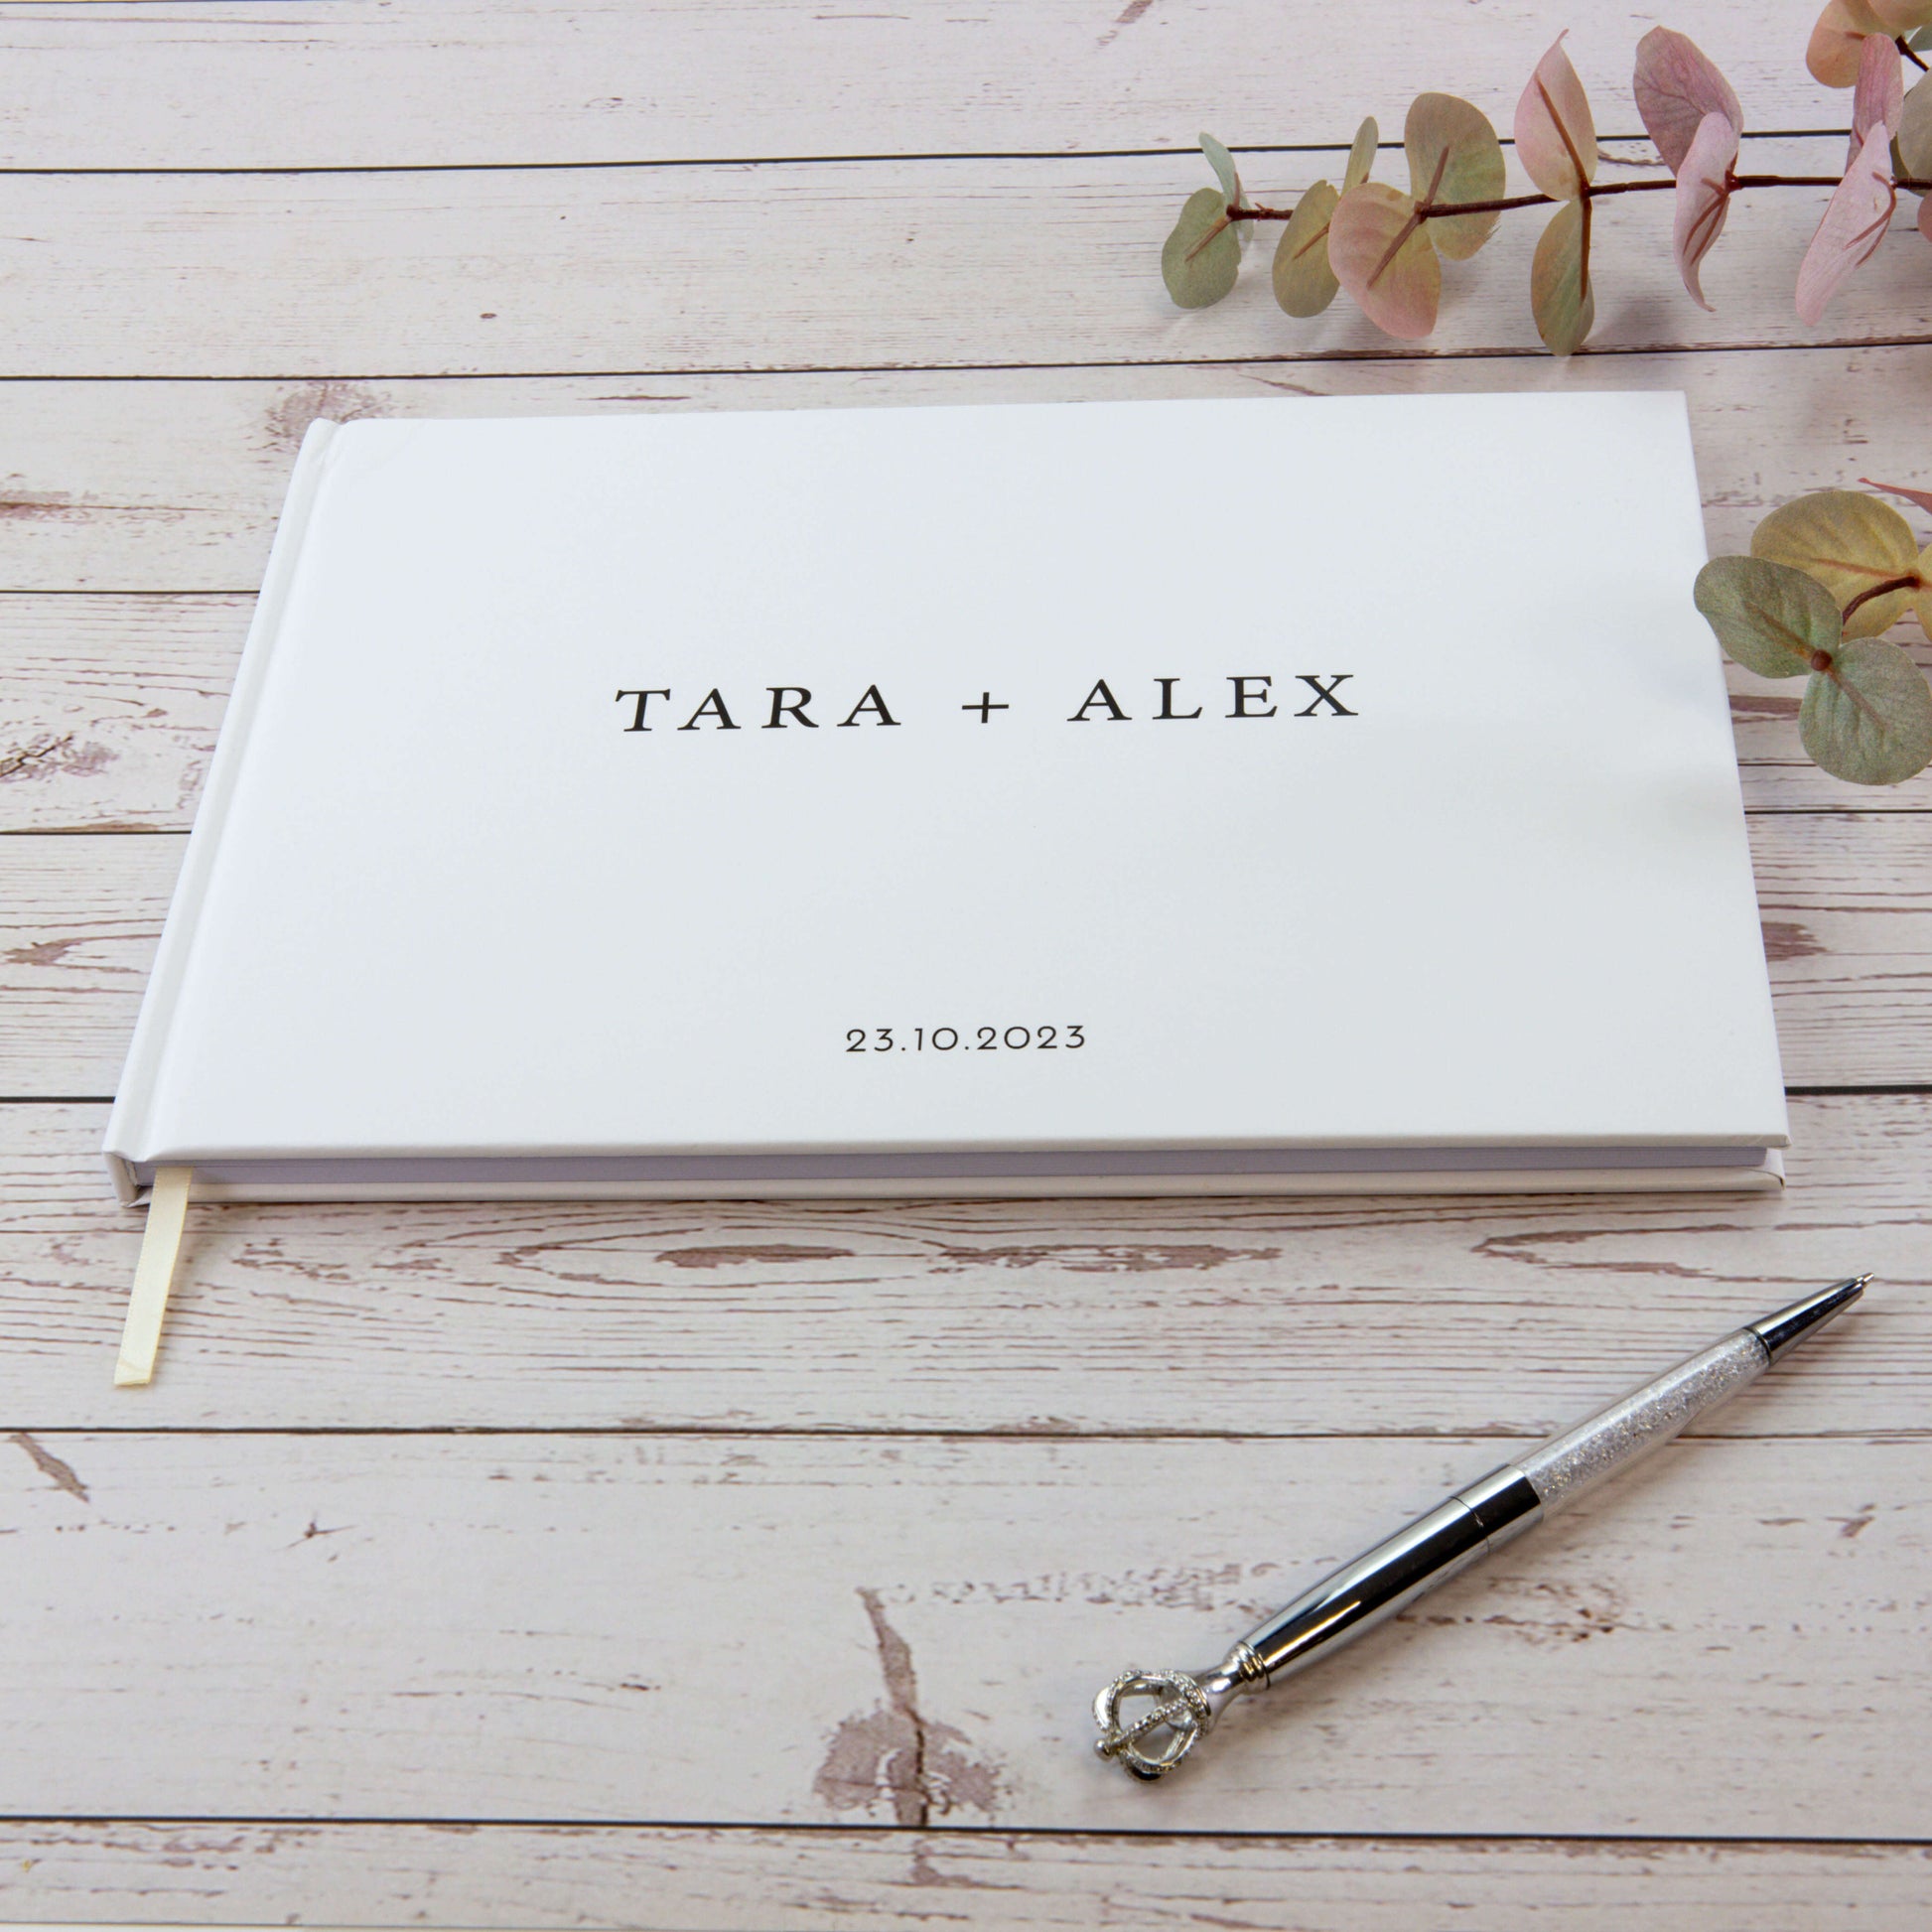 personalised wedding guest book printed 'TARA+ALEX' with the date as '23.10.2023' on it